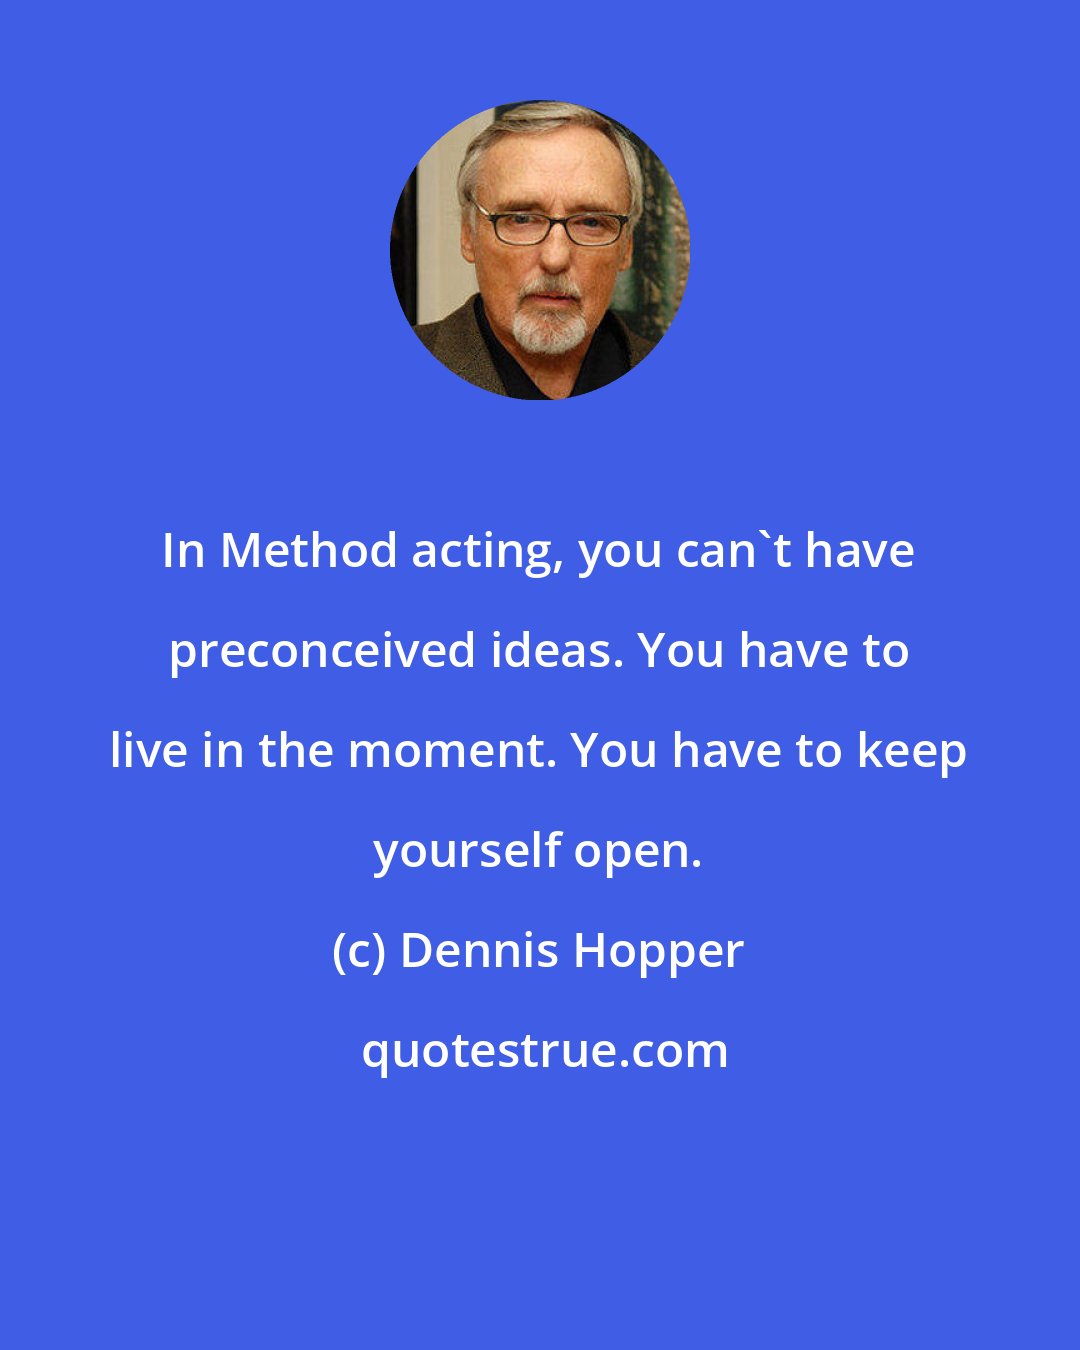 Dennis Hopper: In Method acting, you can't have preconceived ideas. You have to live in the moment. You have to keep yourself open.